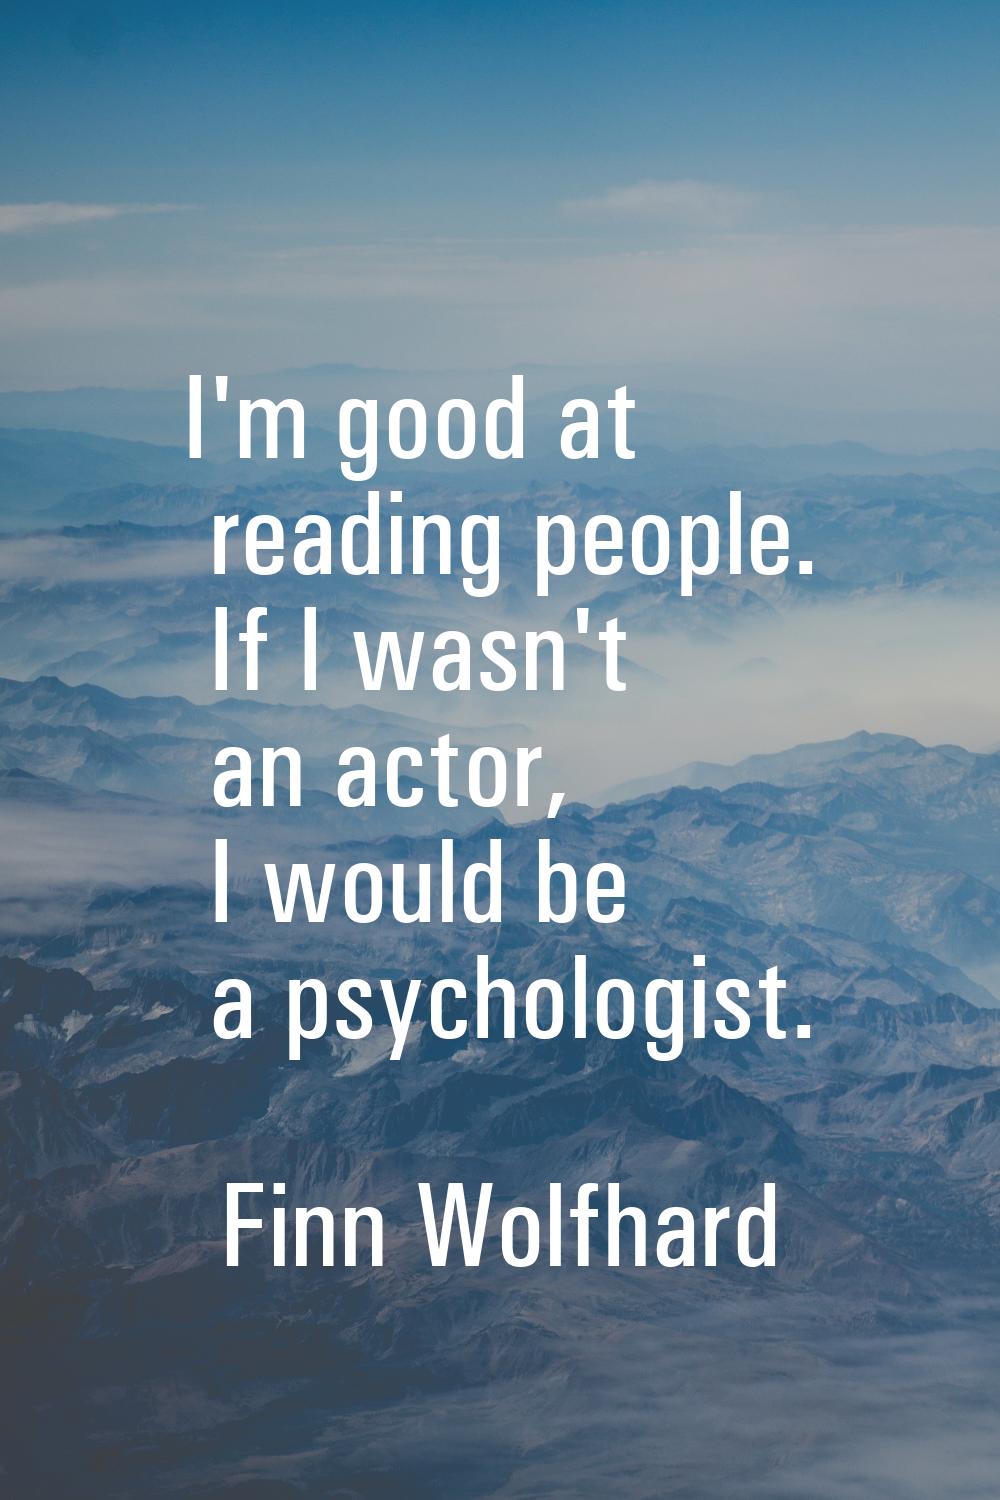 I'm good at reading people. If I wasn't an actor, I would be a psychologist.